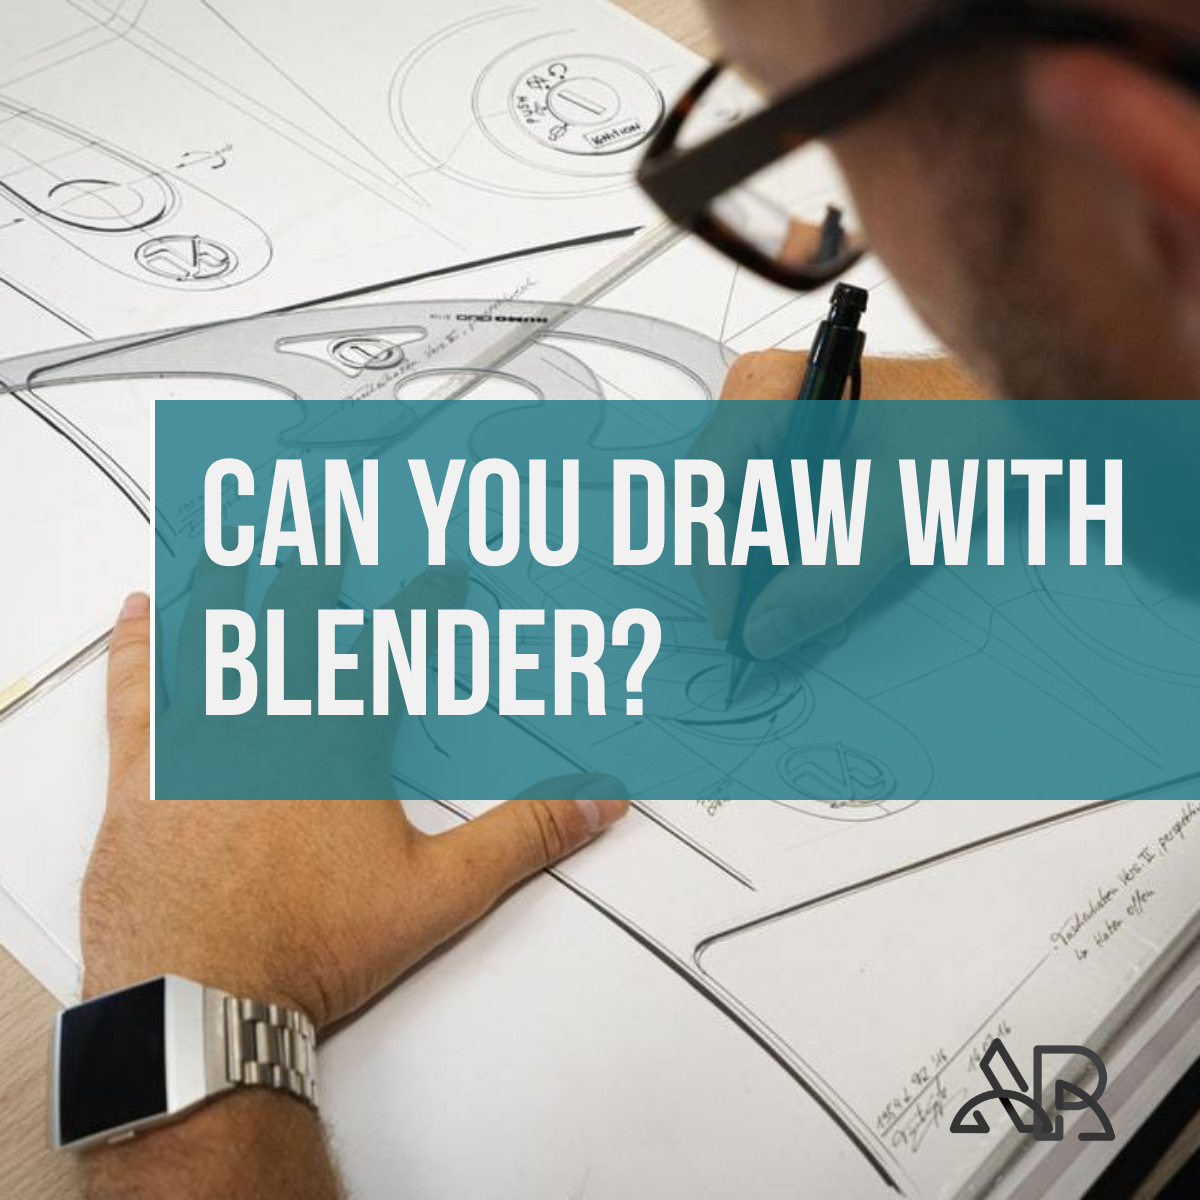 Can you draw with Blender?